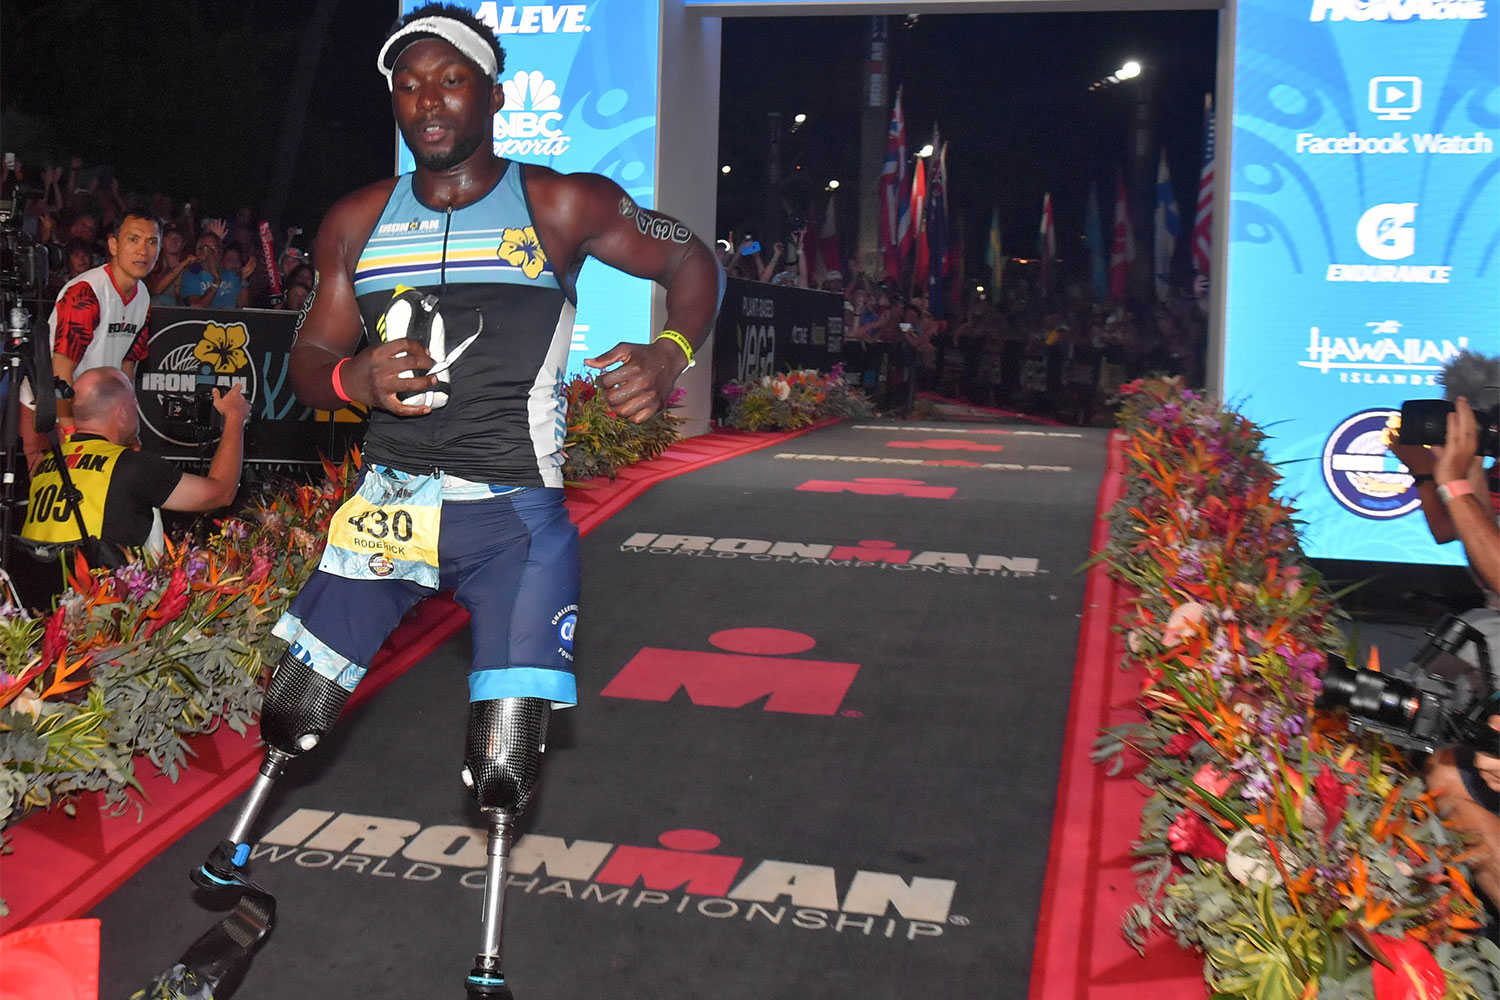 How This Double Amputee Went From Homeless To Ironman The Manual